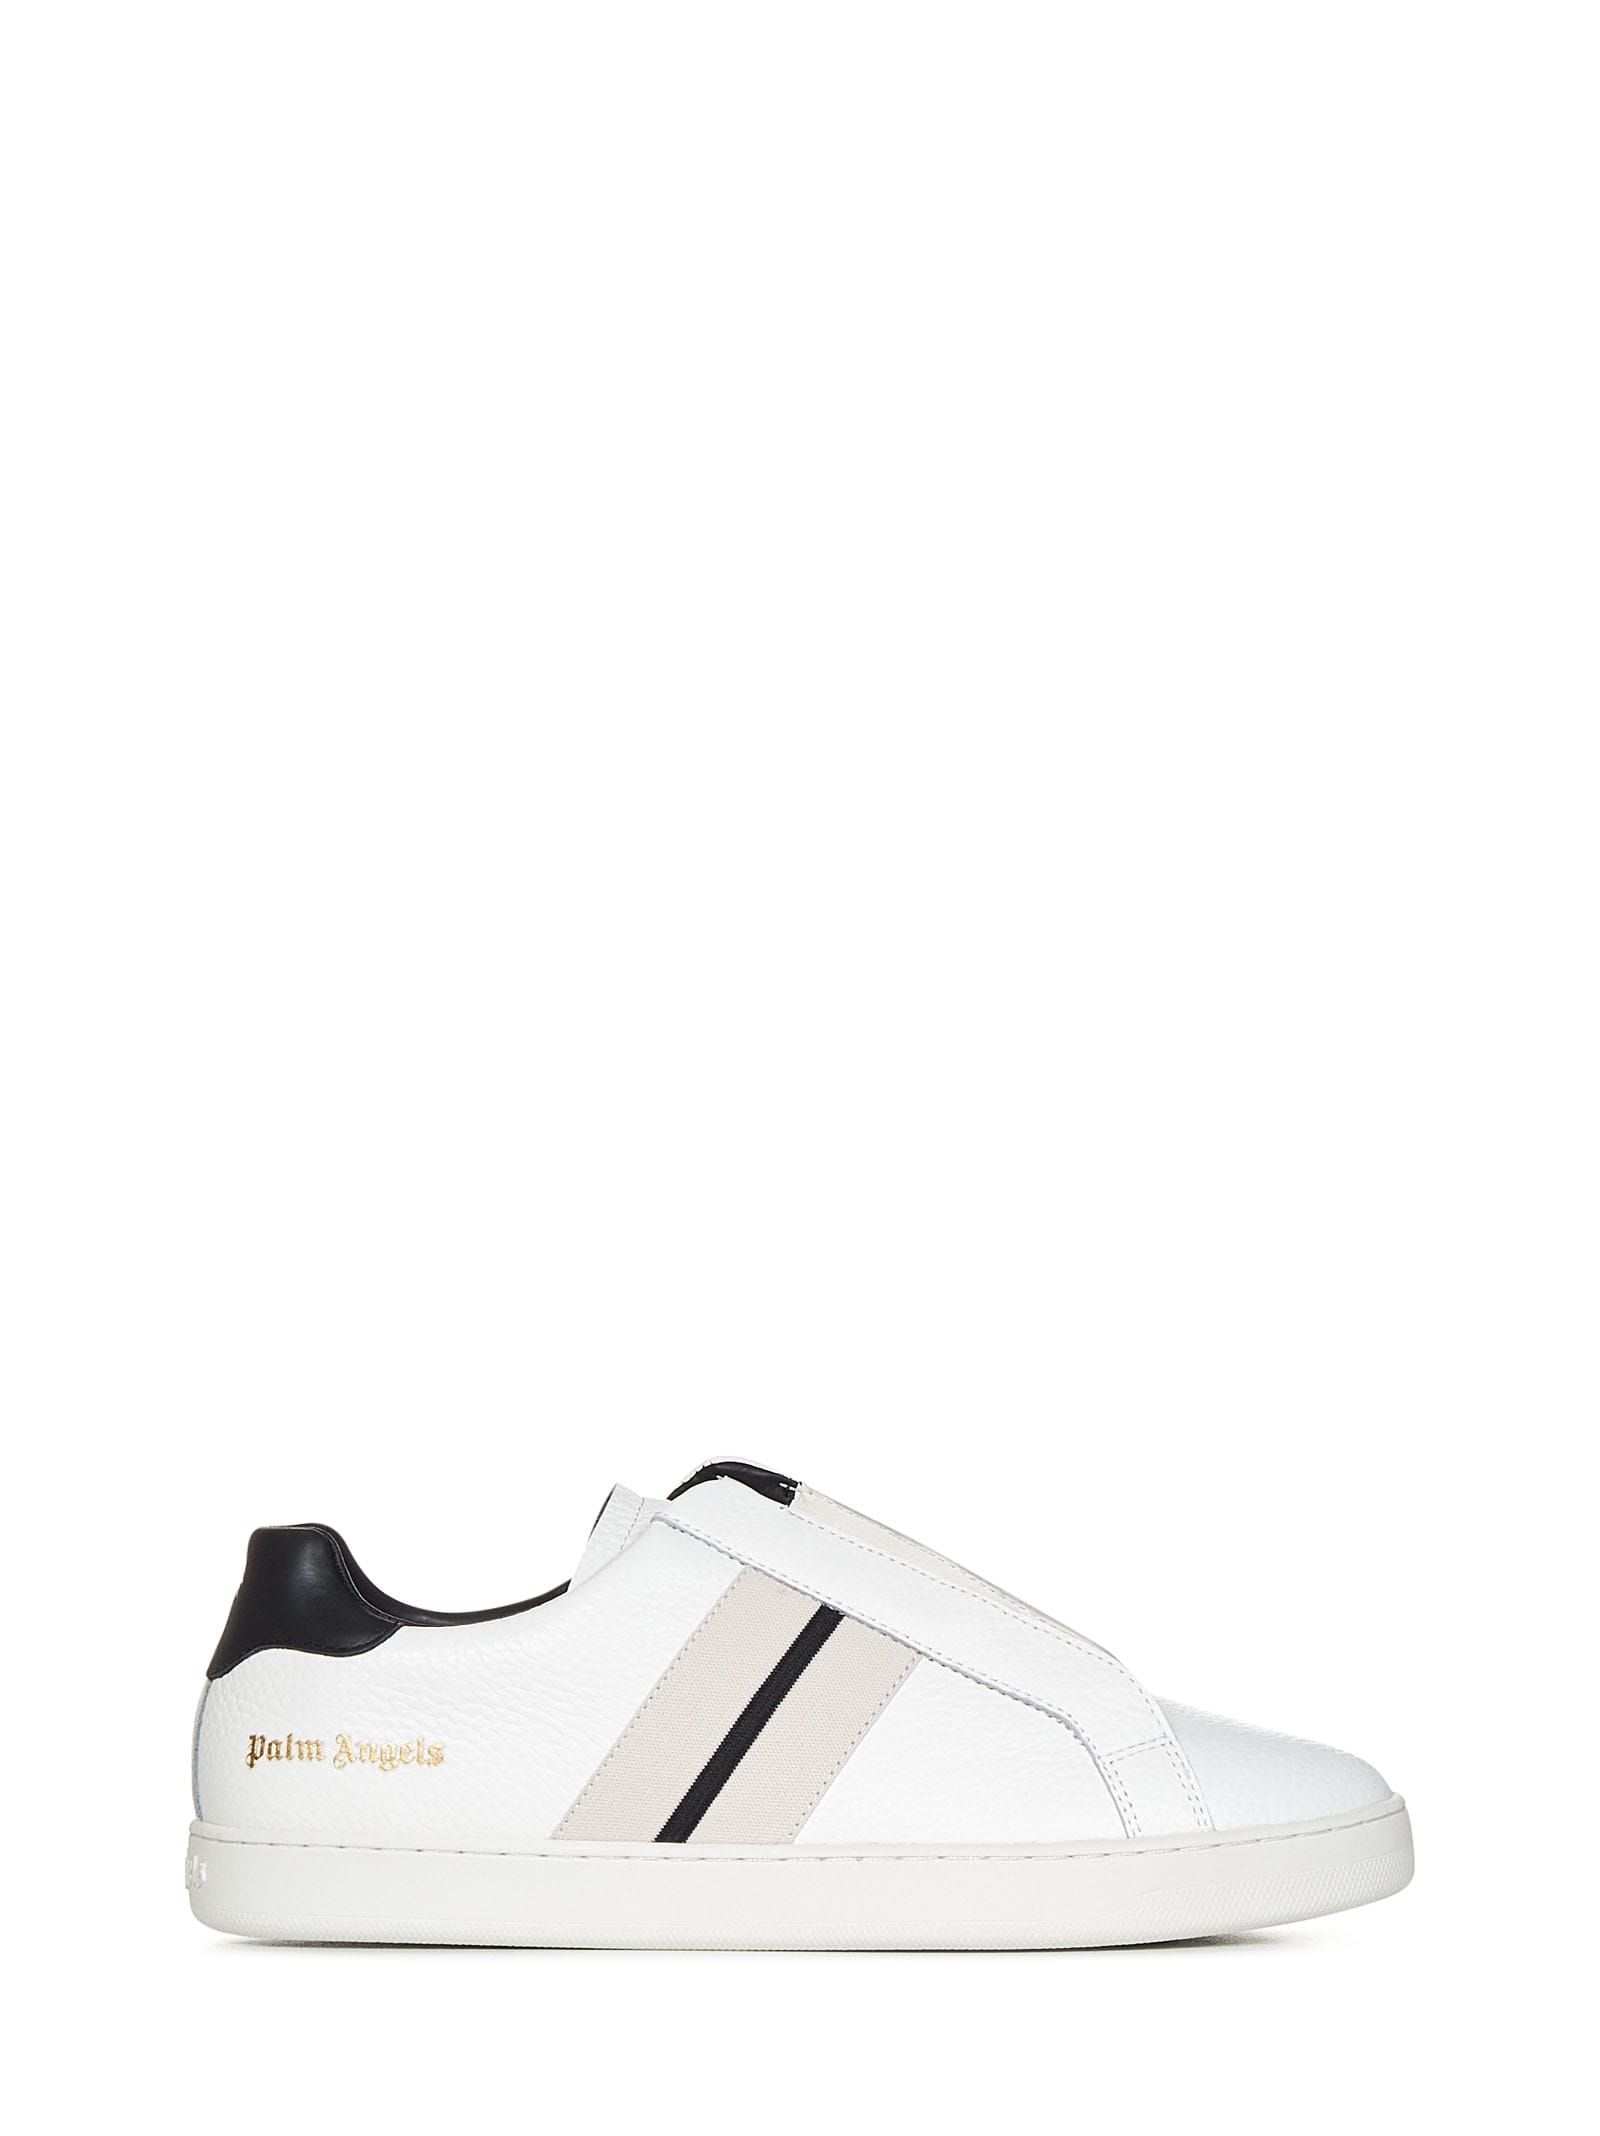 Palm Angels Track Palm Sneakers